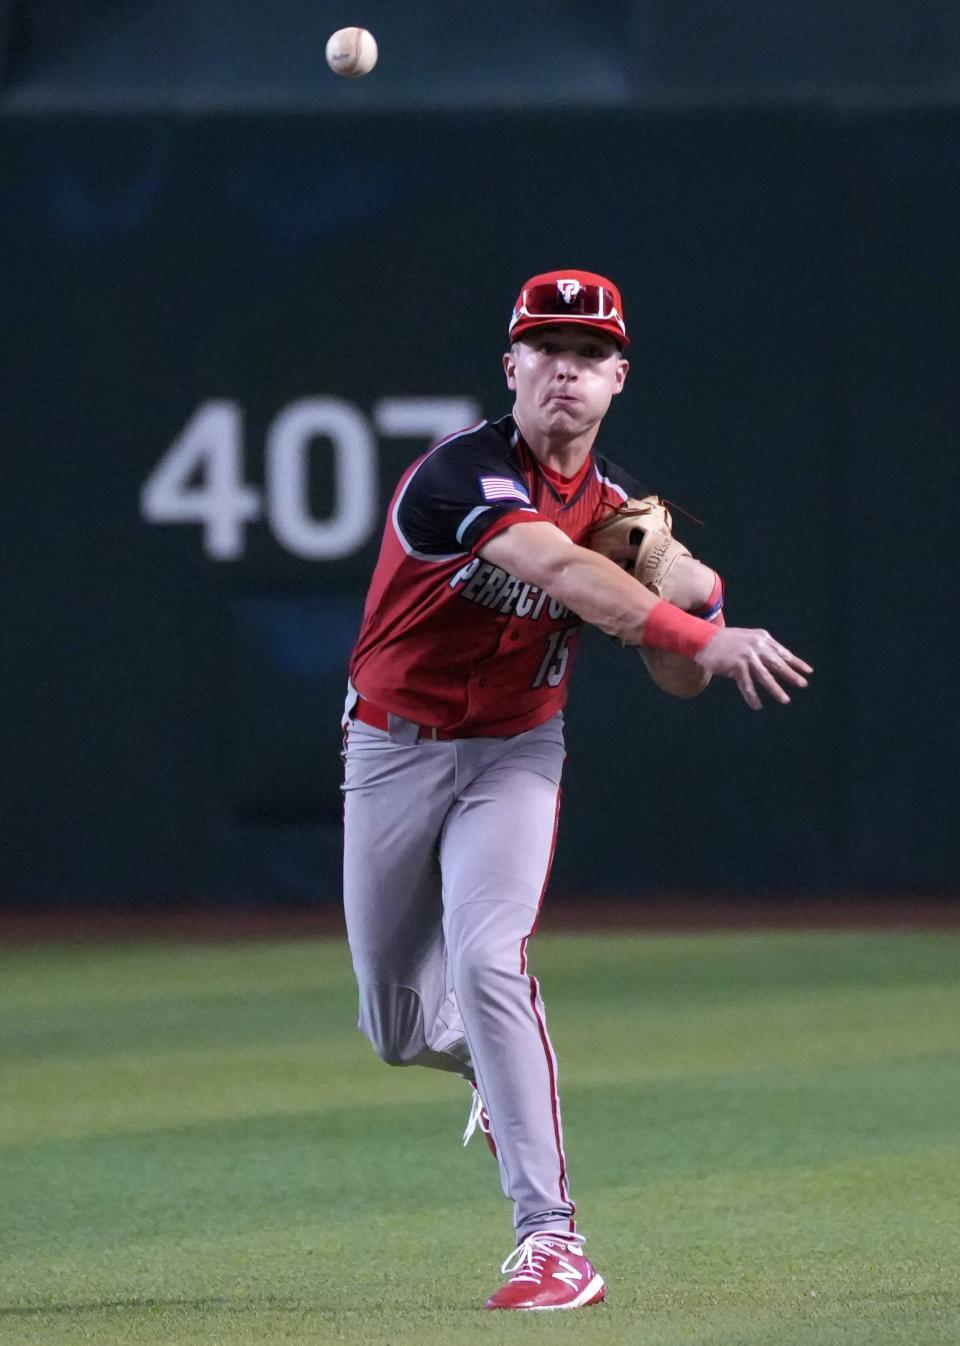 West Squad's Kevin McGonigle throws the ball in to first base during the Perfect Game All-American Classic at Chase Field on Sunday, Aug. 28, 2022.